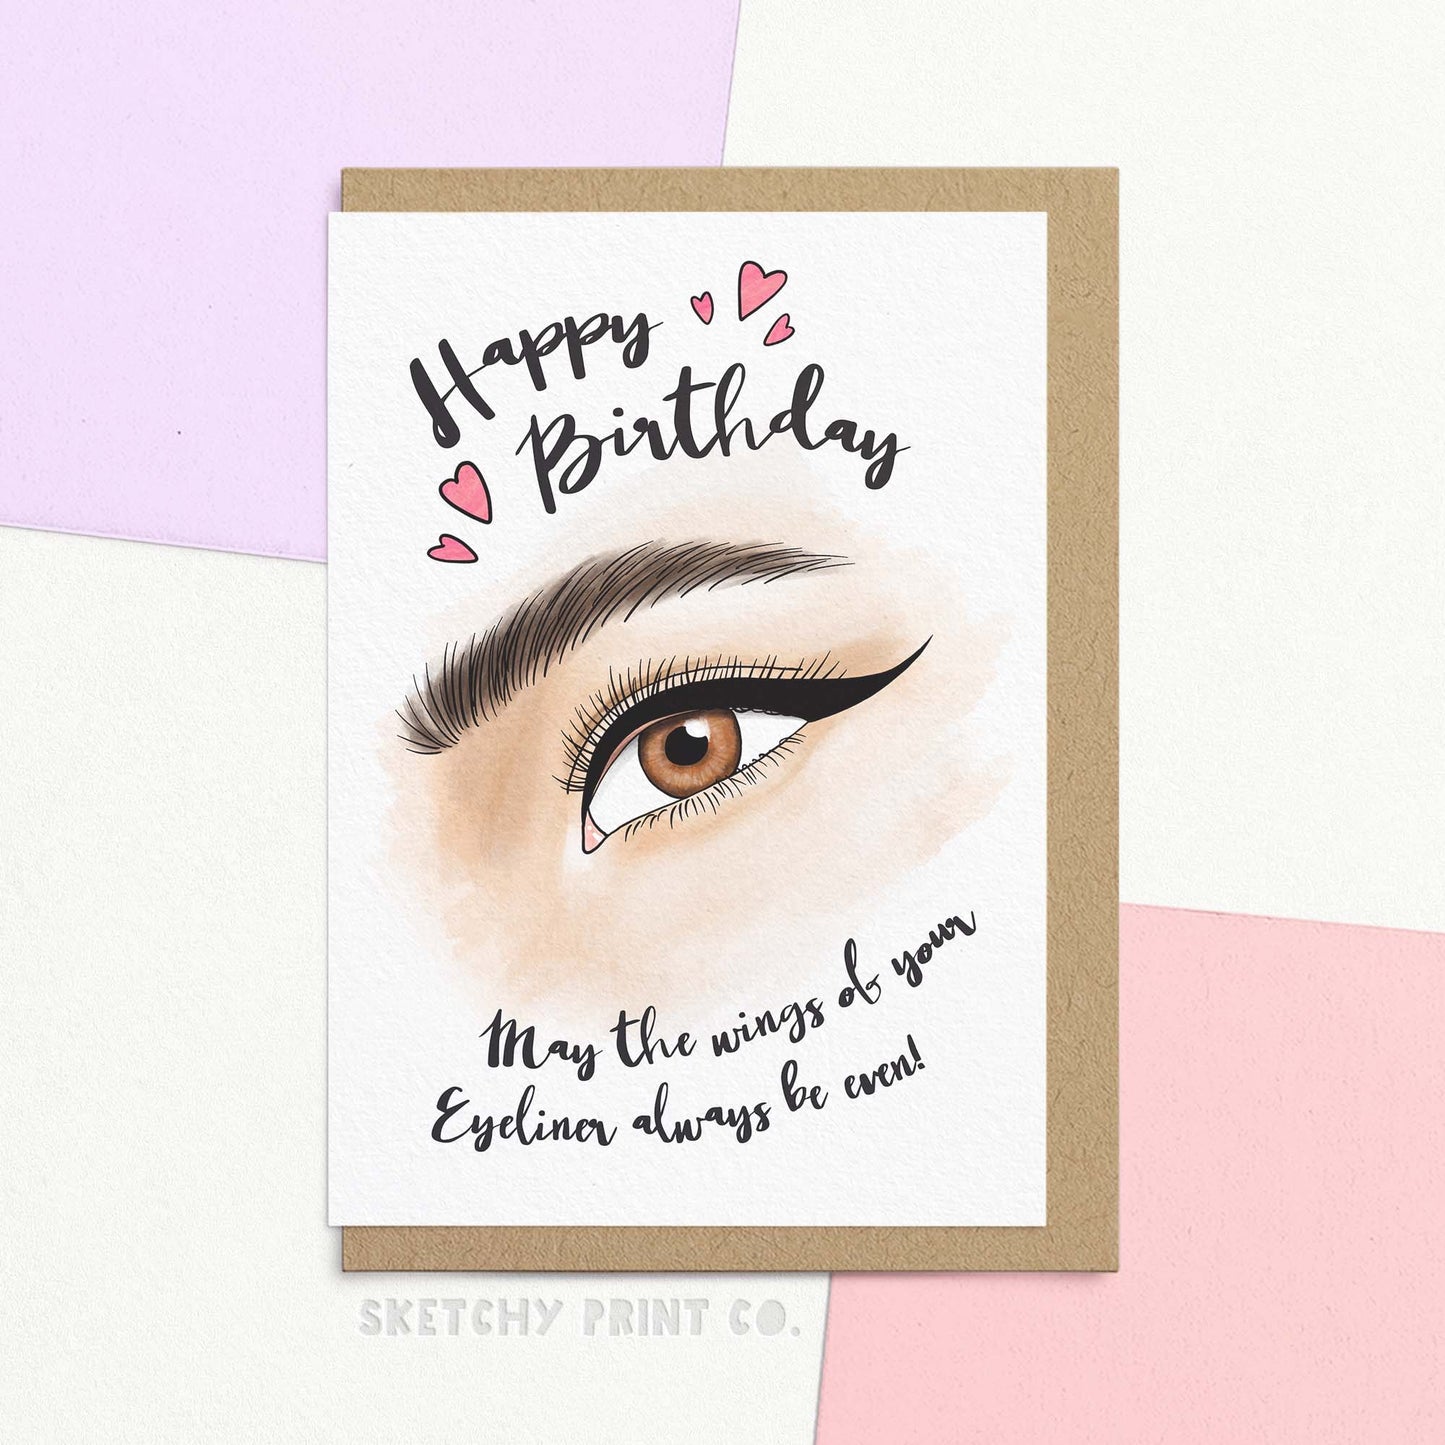 Birthday wishes for best friend, makeup lover. Card reads Happy birthday May the wings of your eyeliner always be even. Give your make up loving best friend birthday wishes with our Eyeliner card. What better birthday wish than their wings always being on point! This cute birthday greetings card is also perfect for cementing your status as the cool auntie to any budding makeup artist!